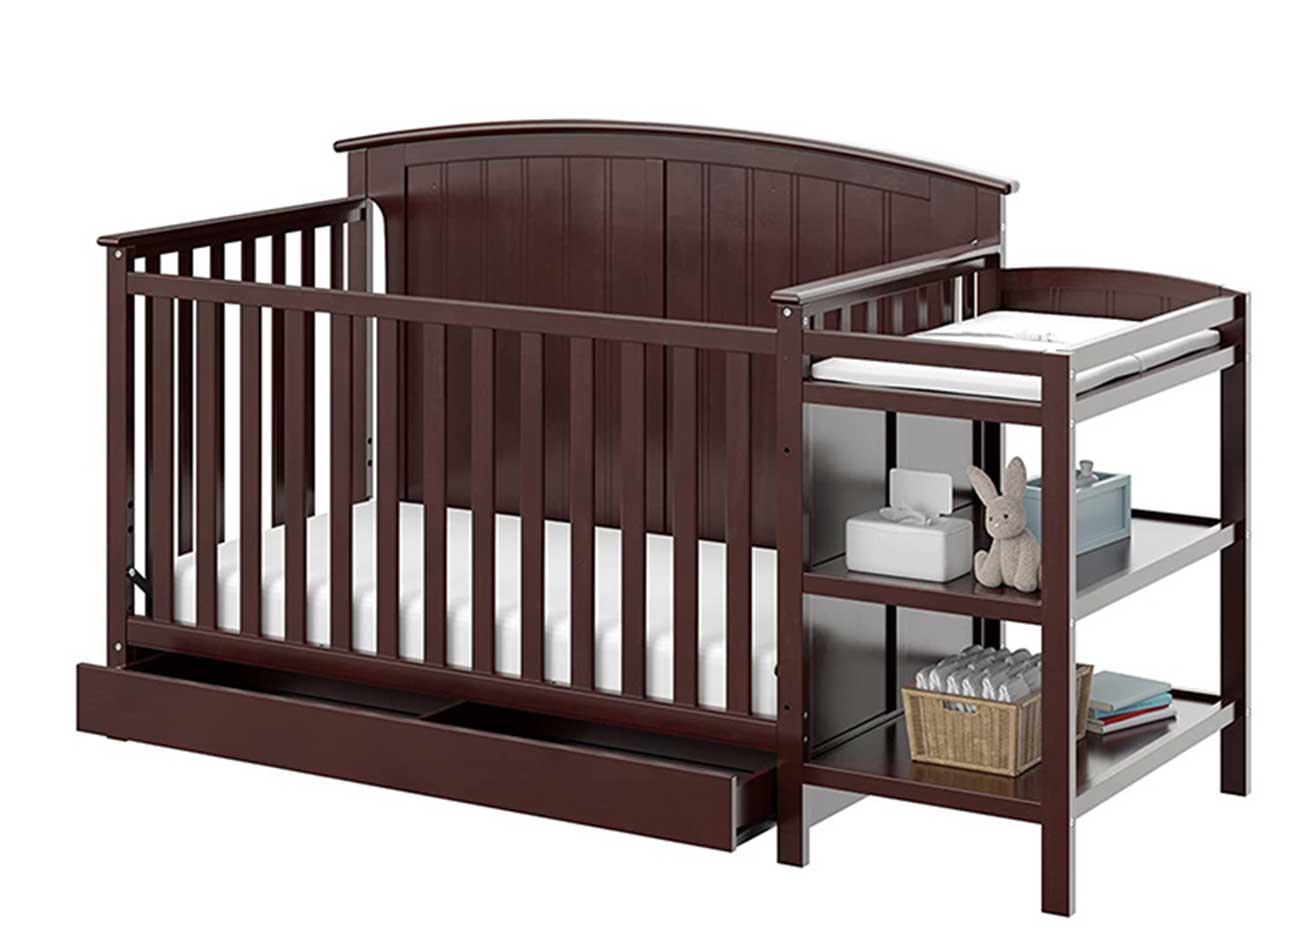 Beds_and_Crib